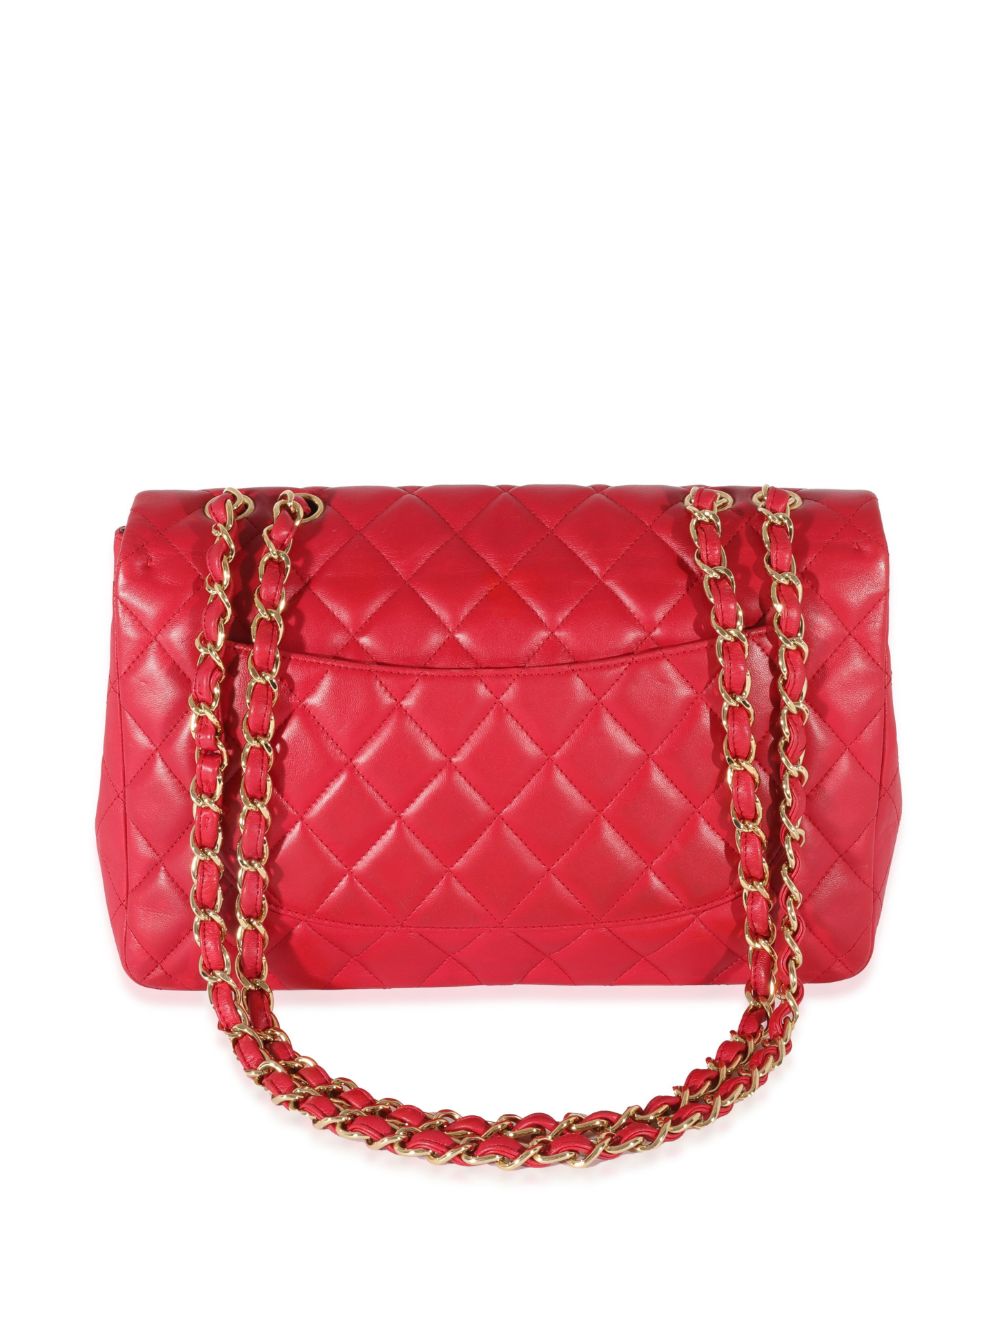 Pre-owned Chanel 2008-2009 Jumbo Classic Flap Shoulder Bag In Pink